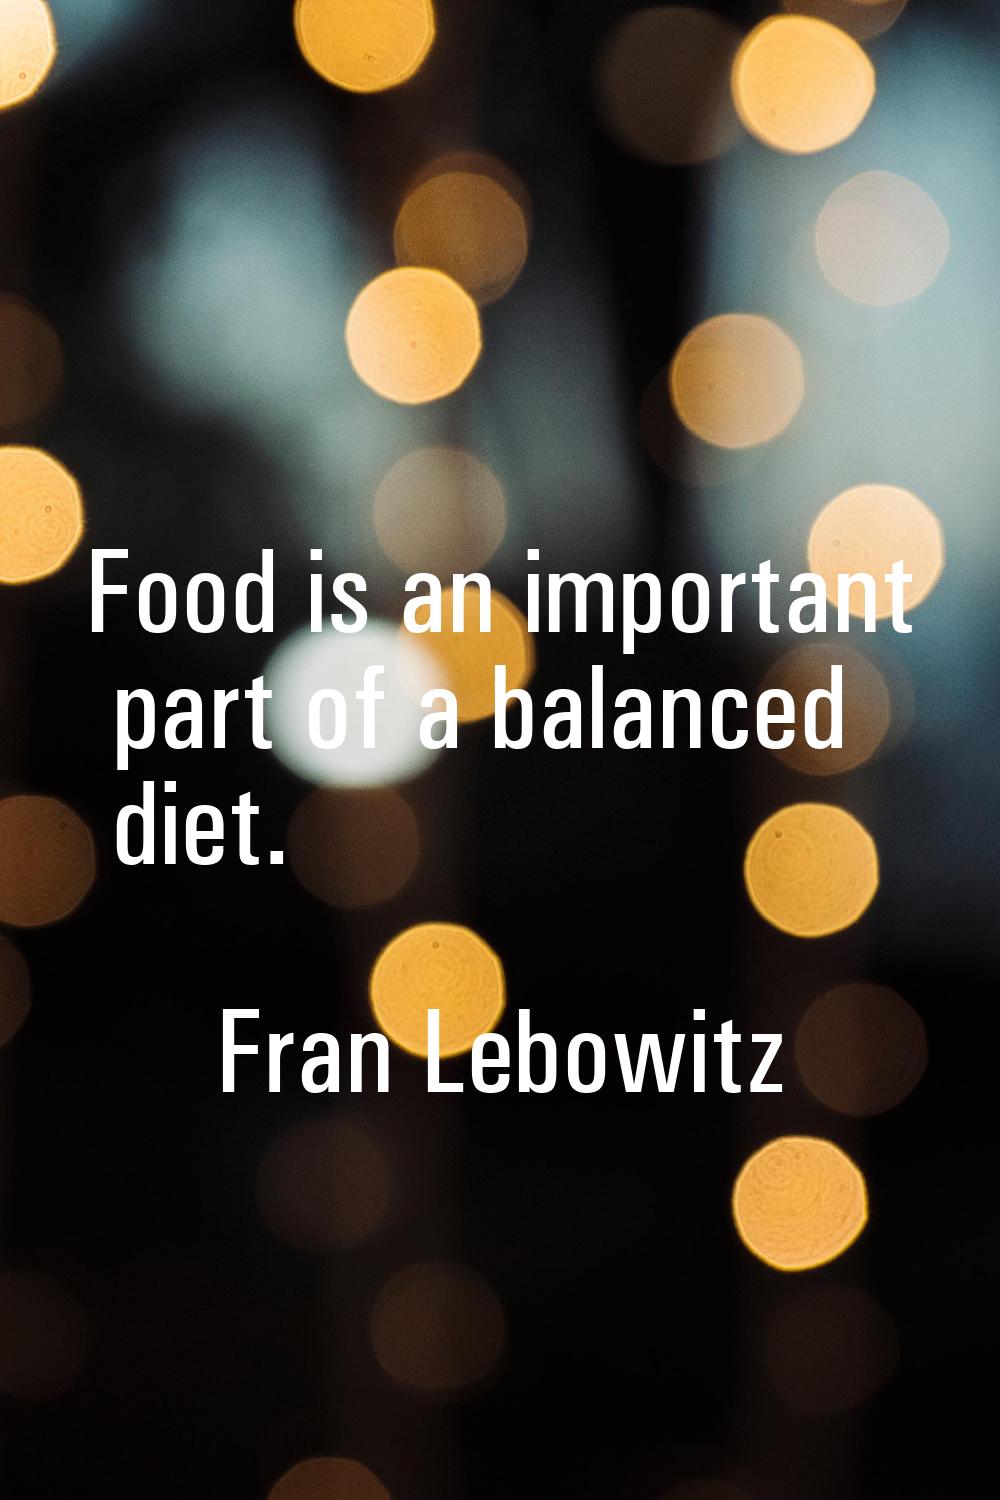 Food is an important part of a balanced diet.